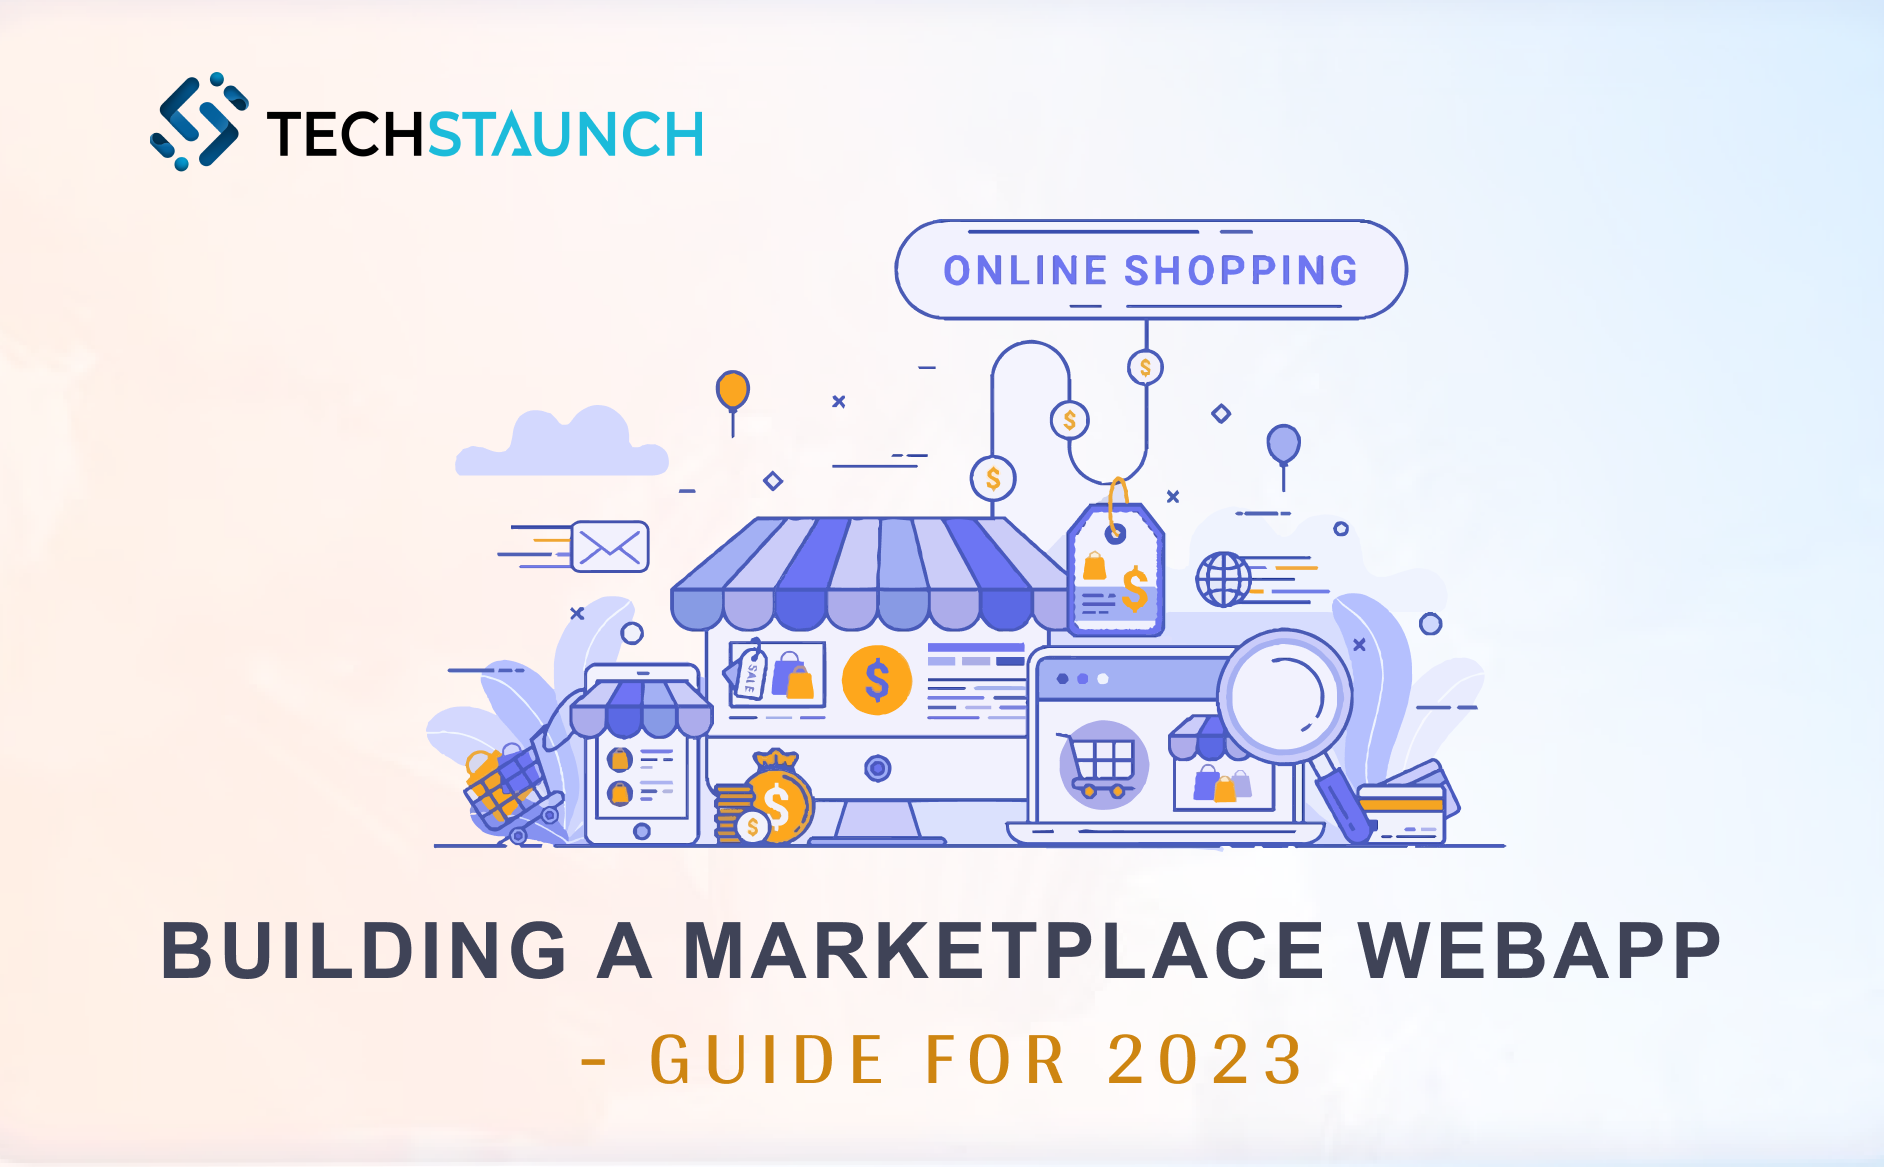 Building a Marketplace WebApp: Guide for 2023